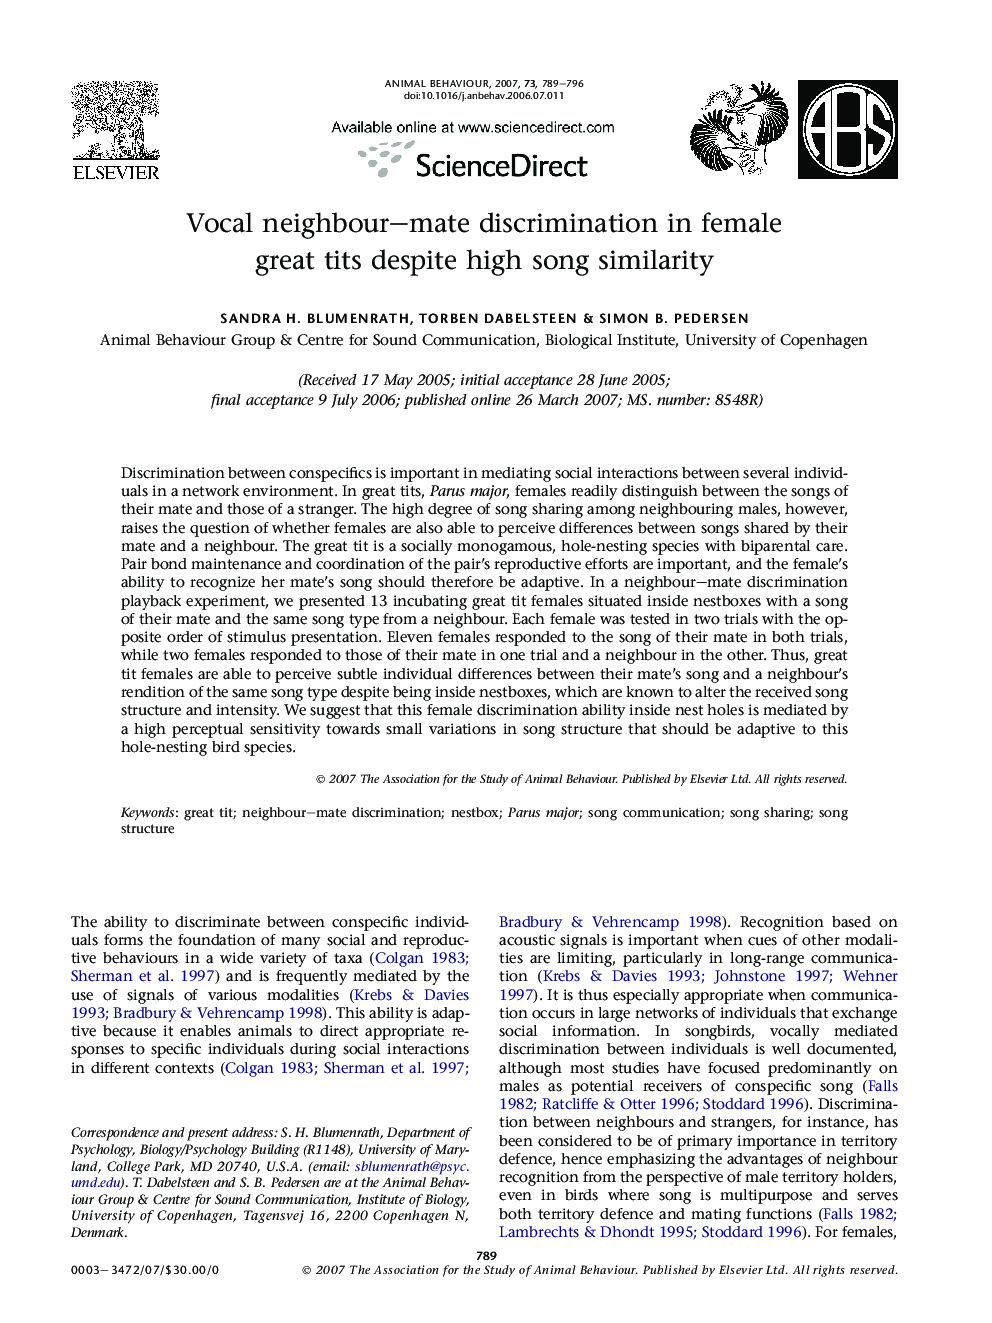 Vocal neighbour–mate discrimination in female great tits despite high song similarity